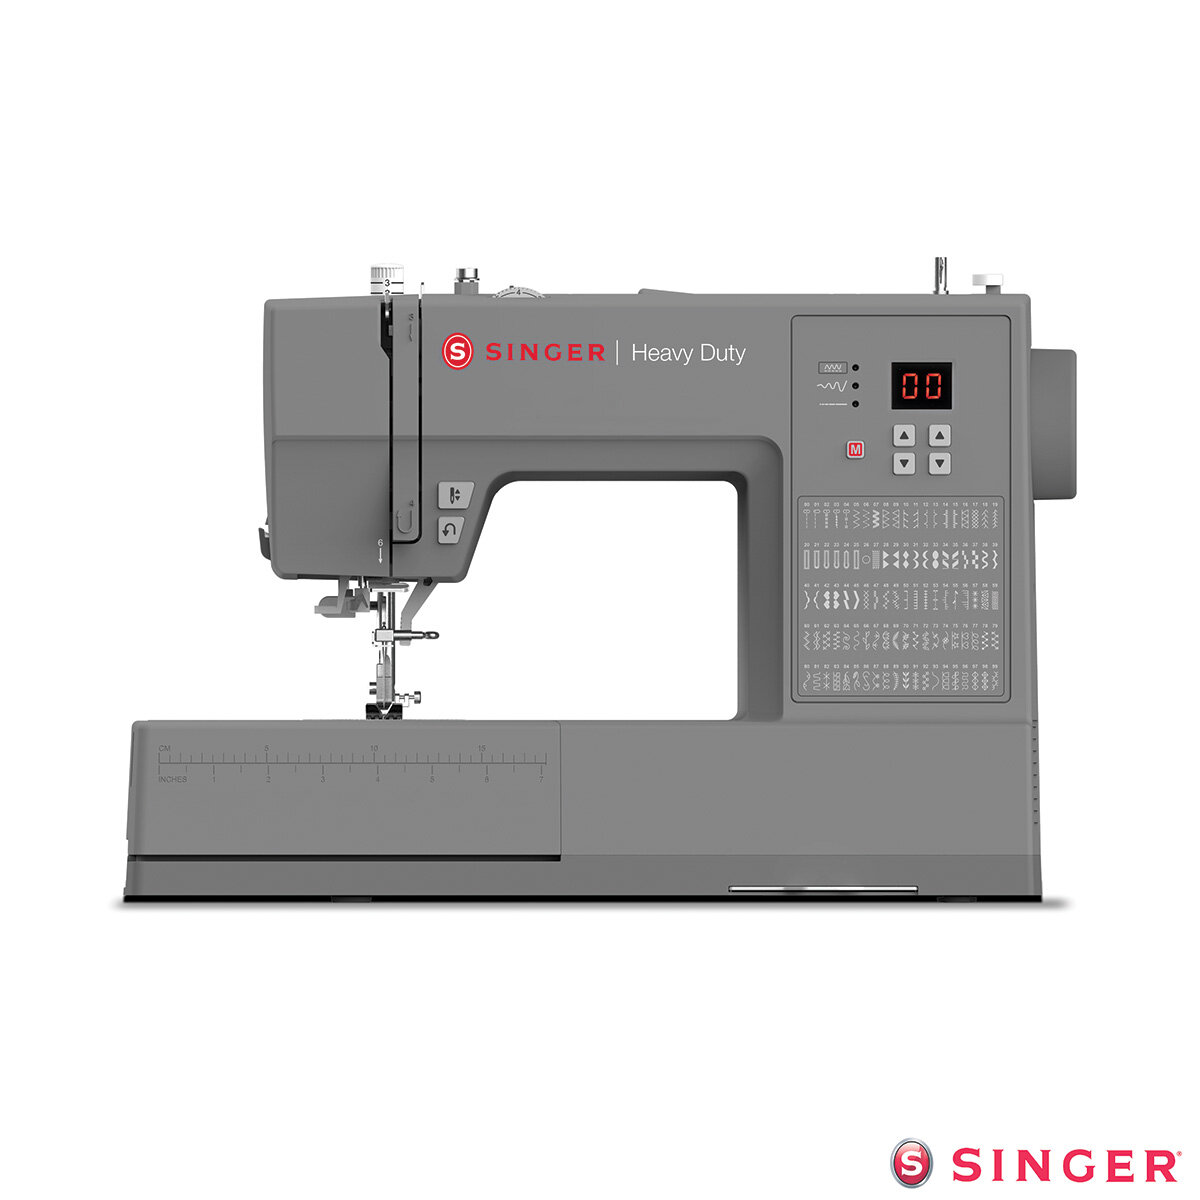 Front Profile of Singer Heavy Duty Sewing Machine